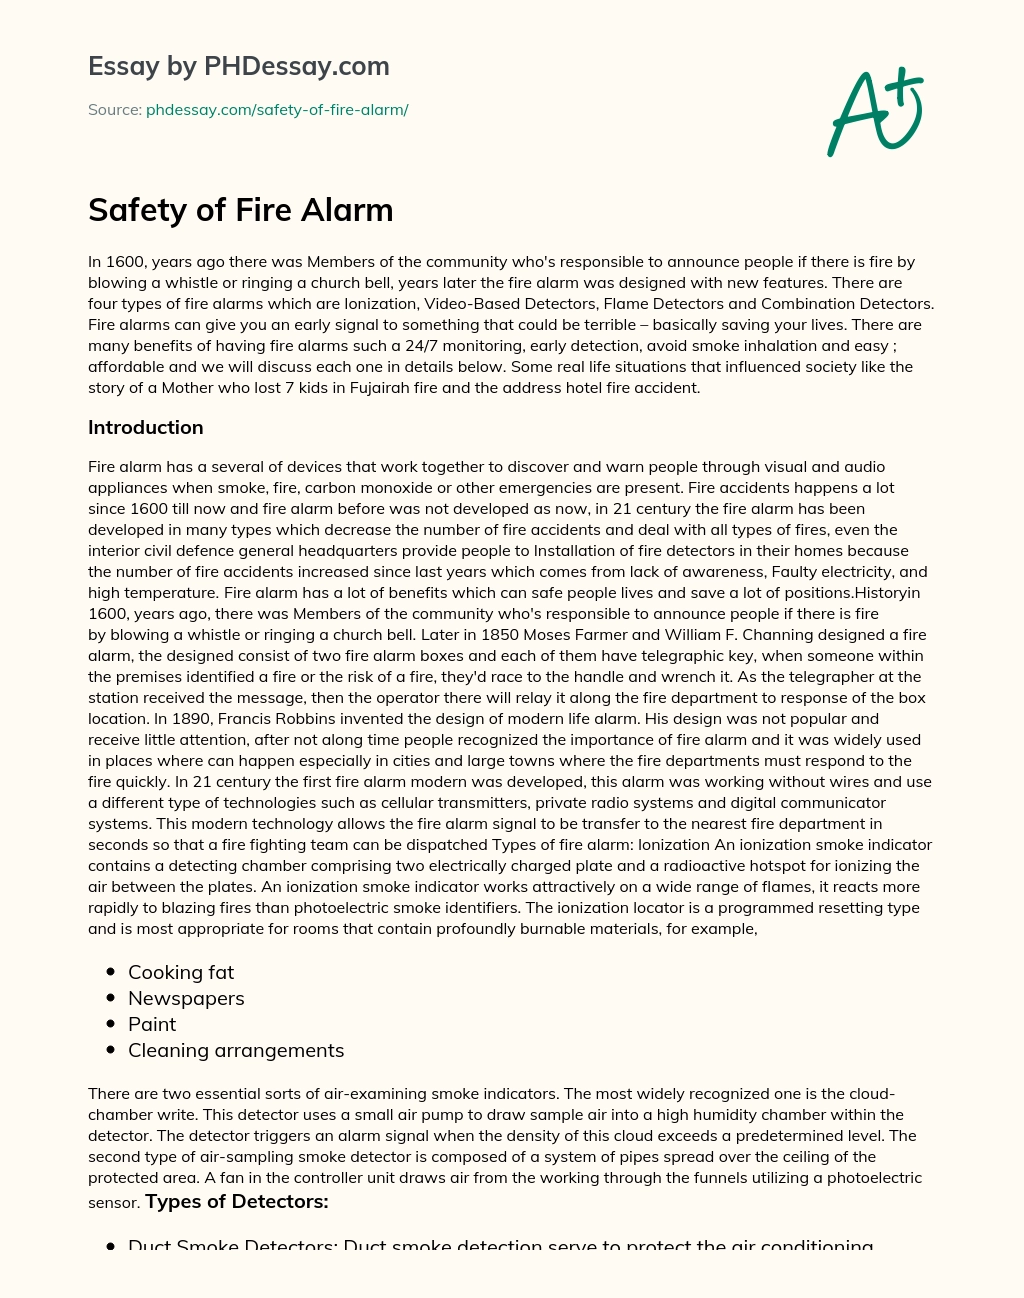 Safety of Fire Alarm essay